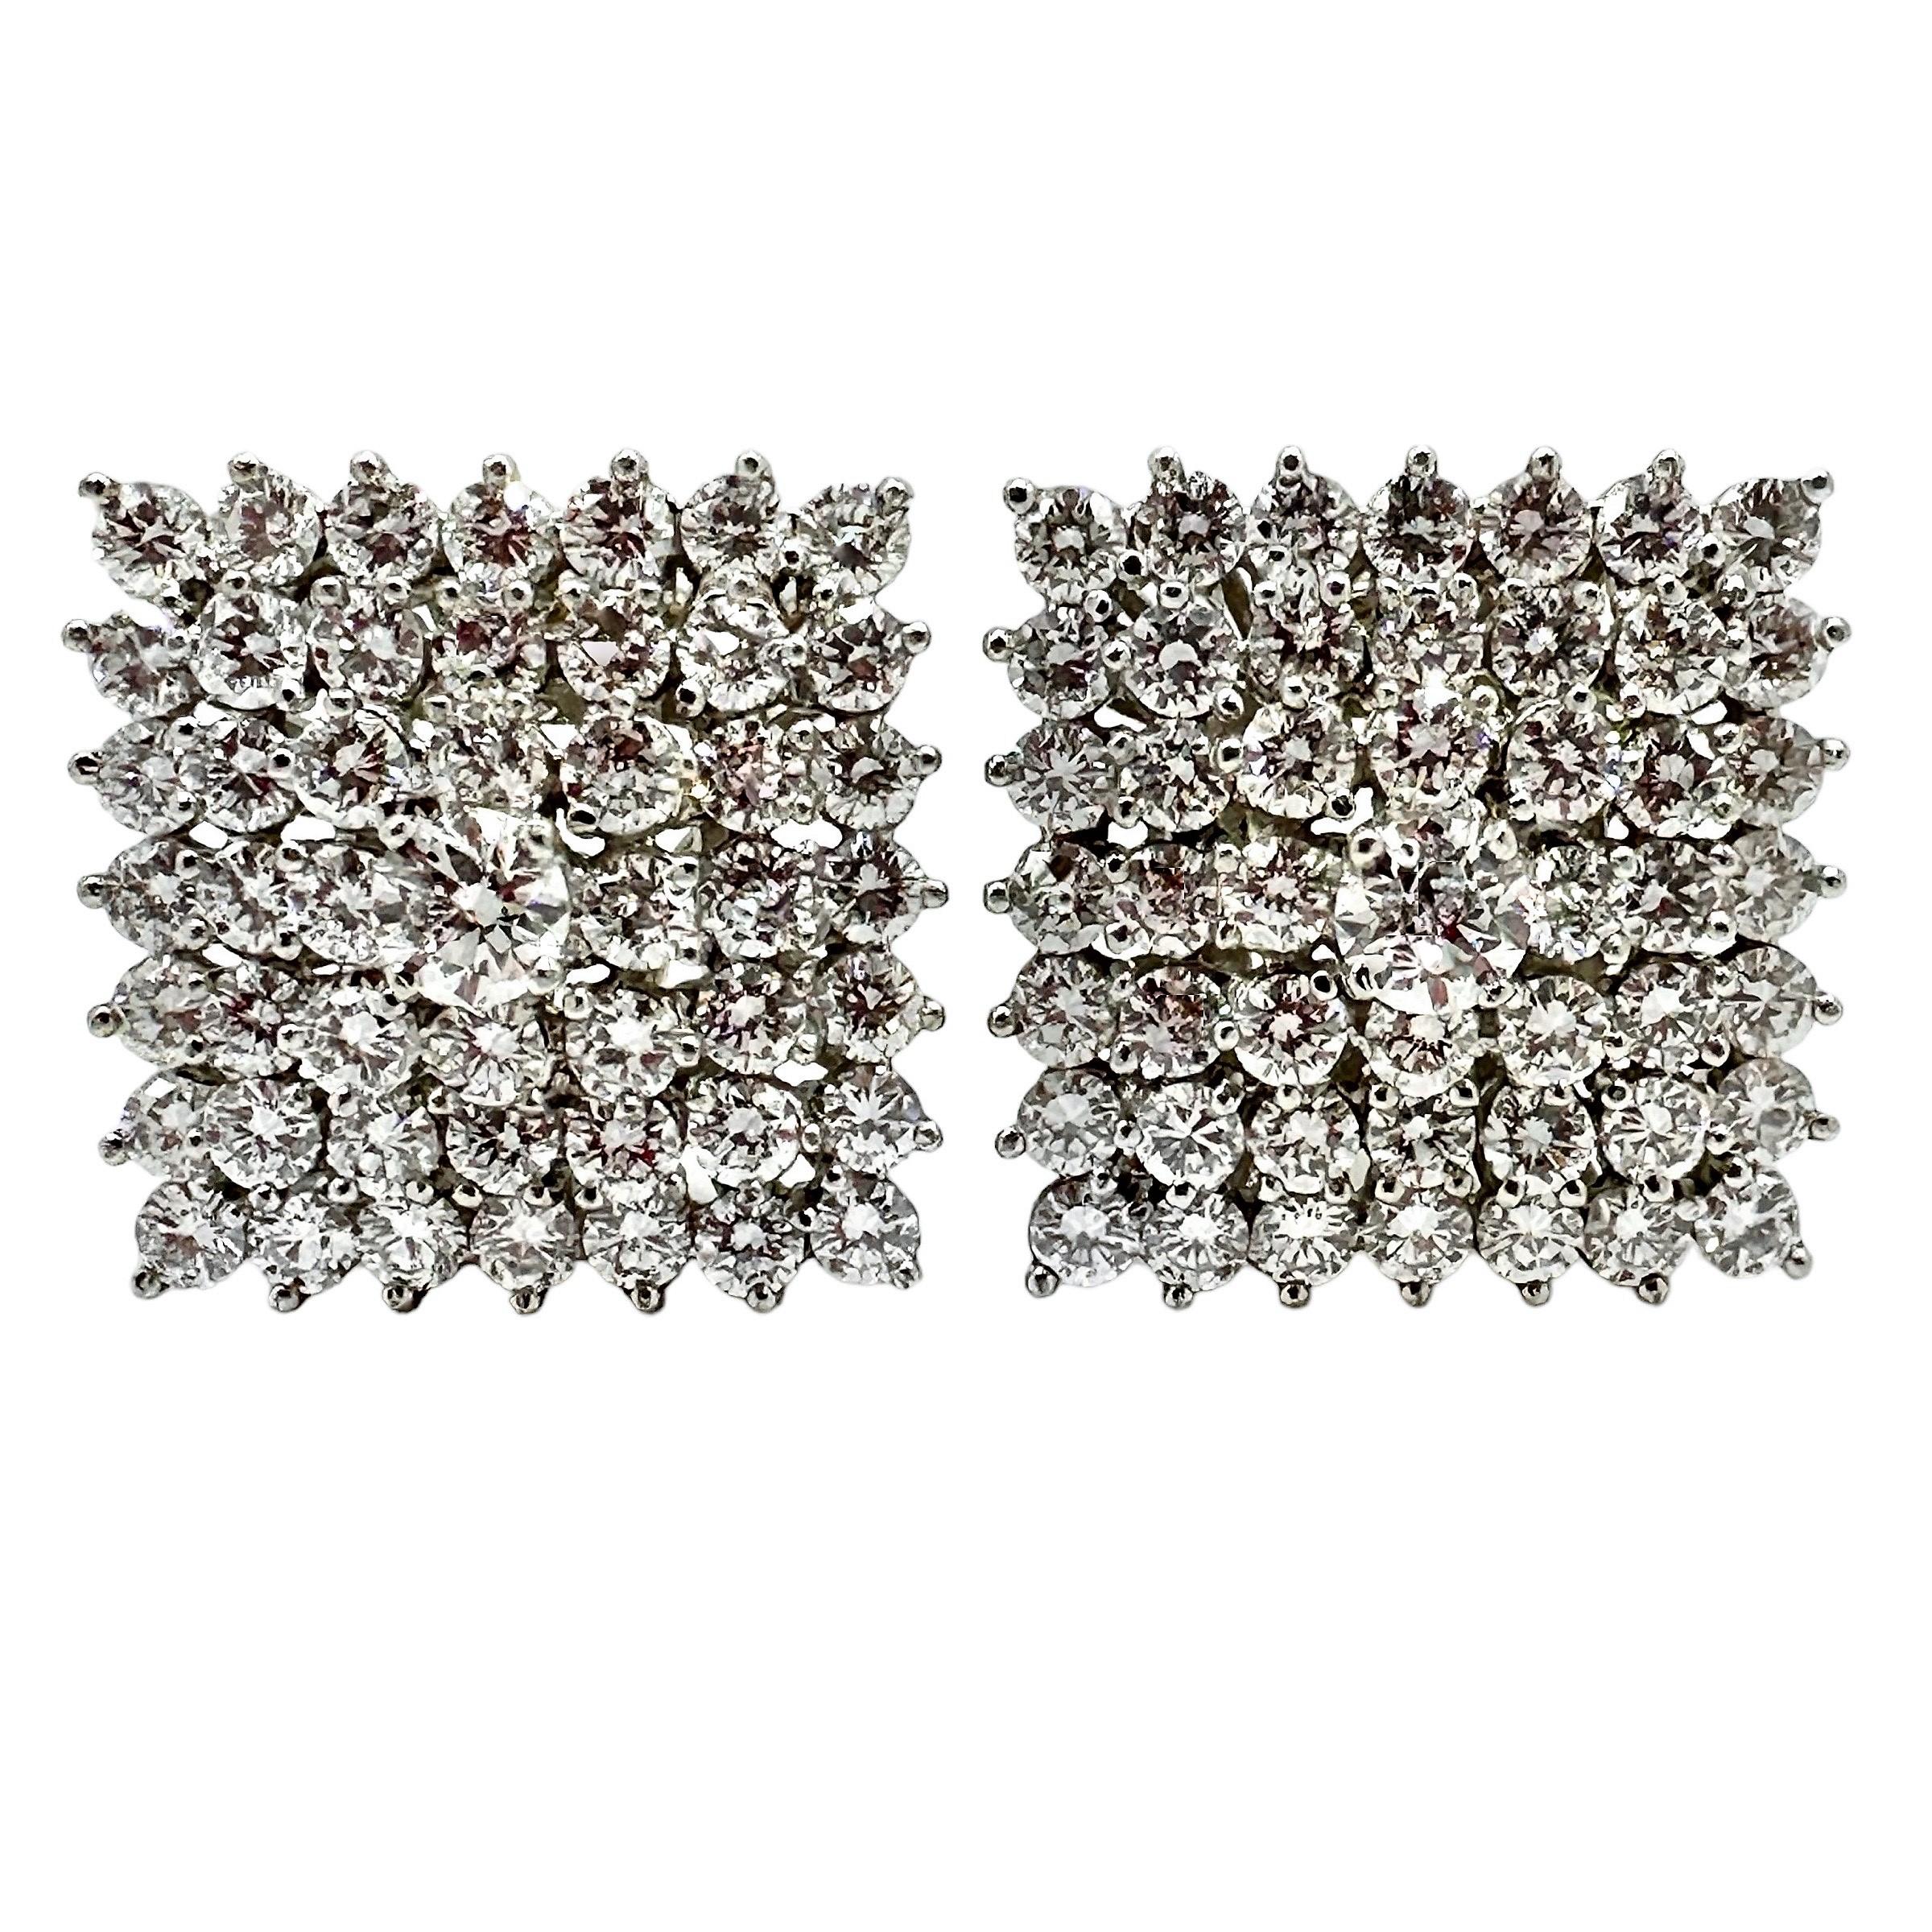 This seductive pair of vintage platinum Tiffany earrings are set with a total of 98 brilliant cut diamonds with a center stone in each weighing approximately .35ct. The pair scintillates beautifully. Total approximate diamond weight is 8.75ct of